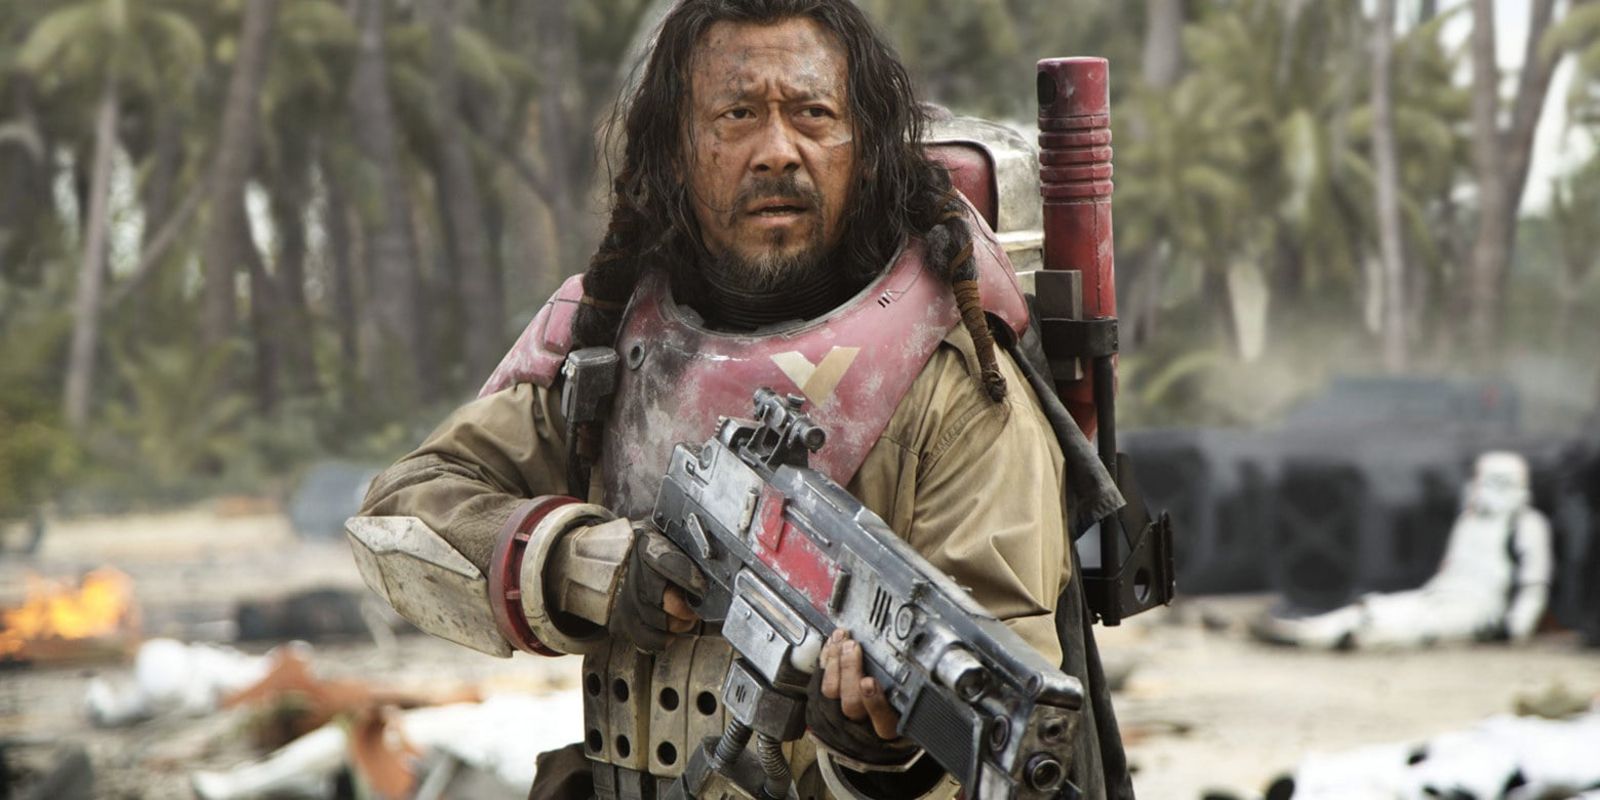 Baze Malbus on the Scarif battlefront in Rogue One_ A Star Wars Story